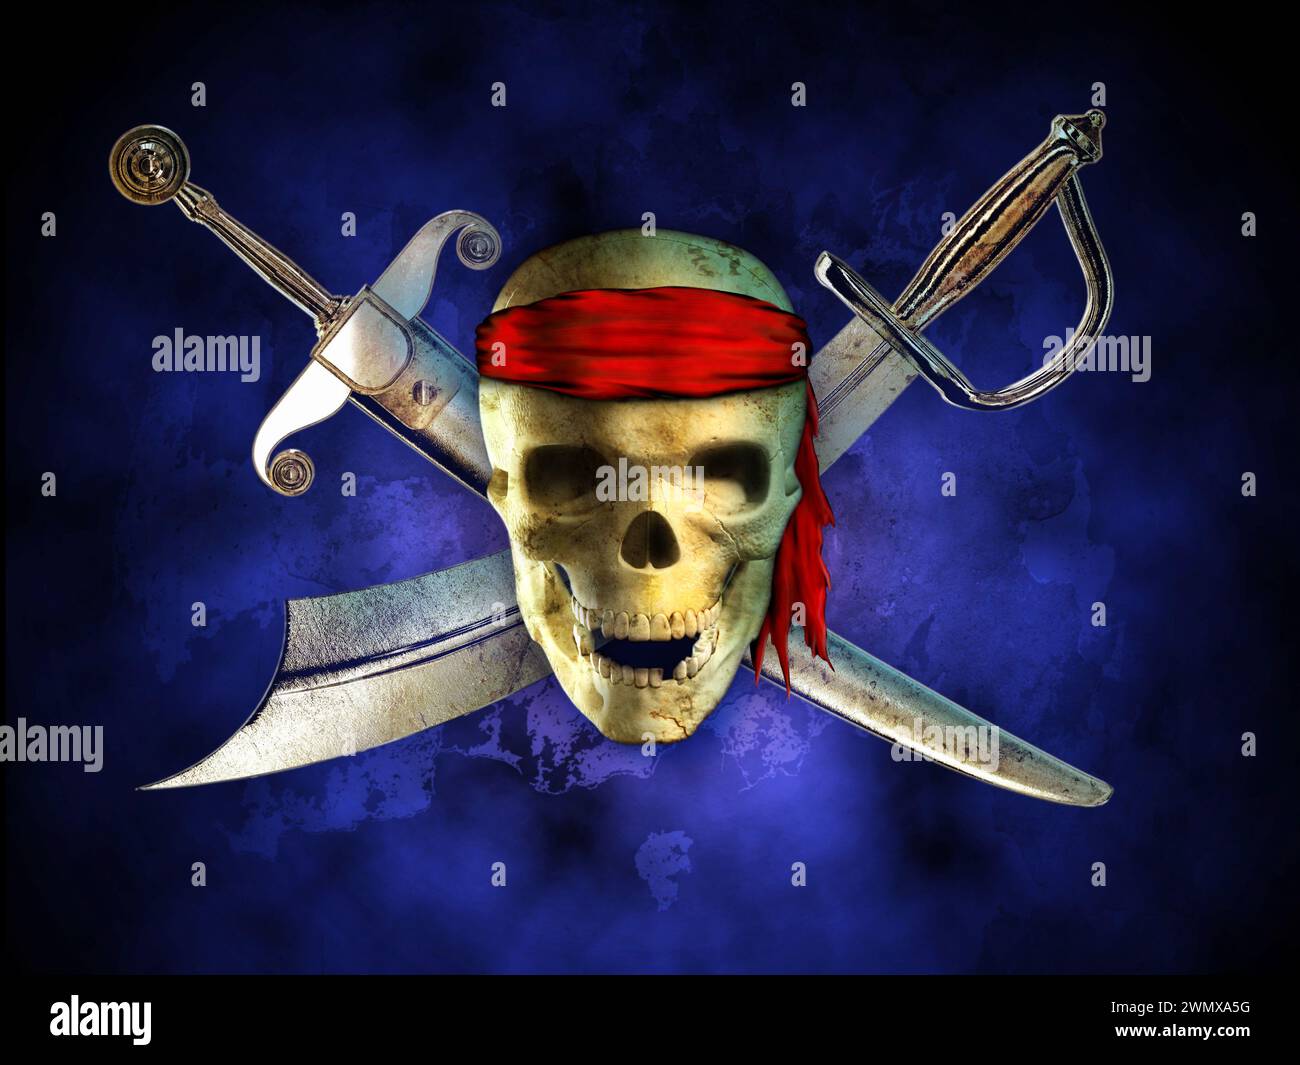 Menacing pirate skull with two crossed swords on background. Digital illustration. Stock Photo